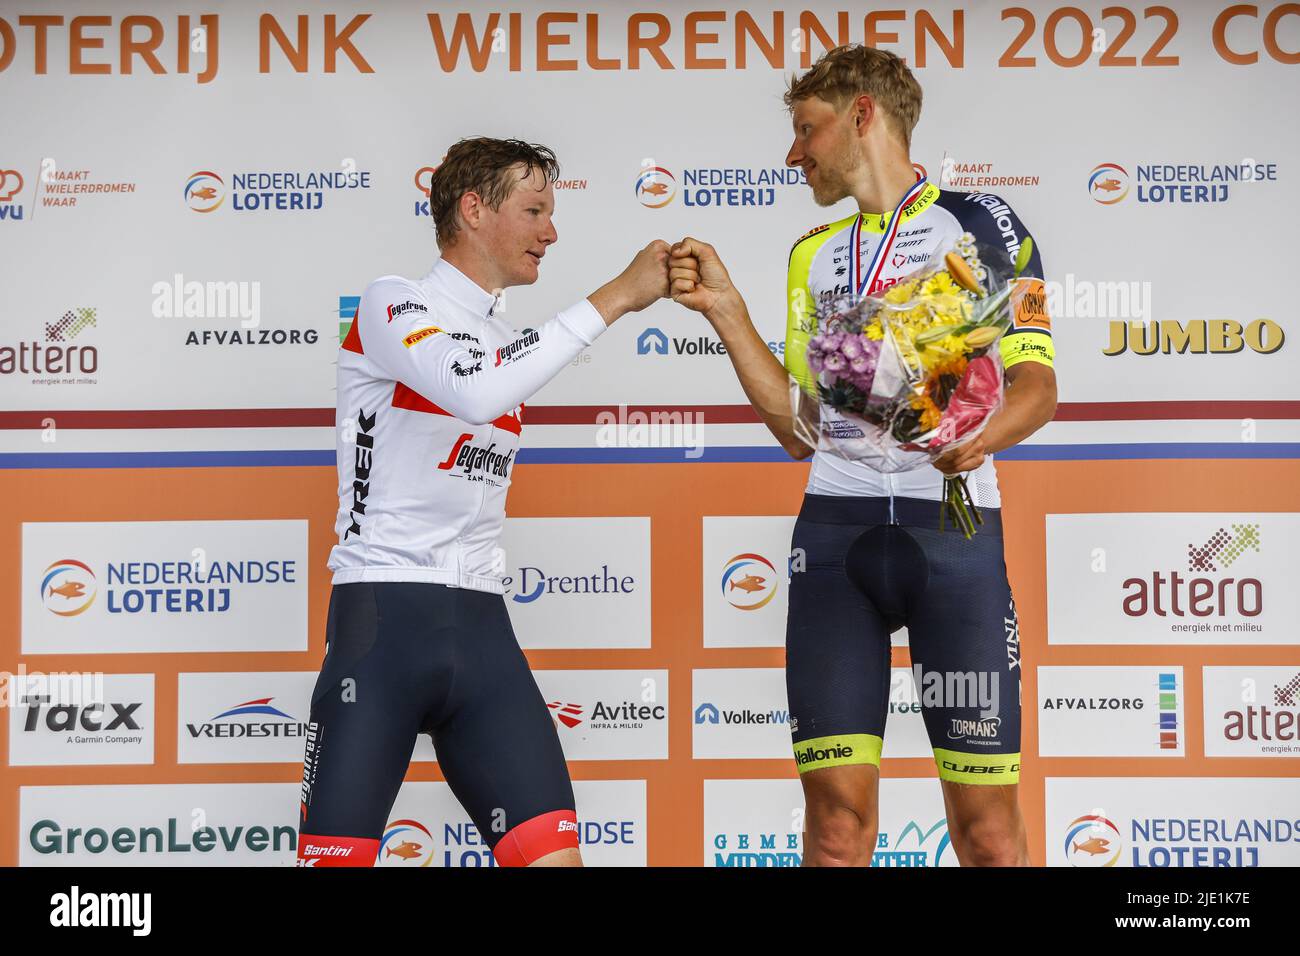 Drenthe, Netherlands. 24th June 2022. EMMEN - Cyclists Daan Hoole (second) and Taco van der Hoorn (third) after the National Championships Cycling in Drenthe. ANP BAS CZERWINSKIA Credit: ANP/Alamy Live News Stock Photo